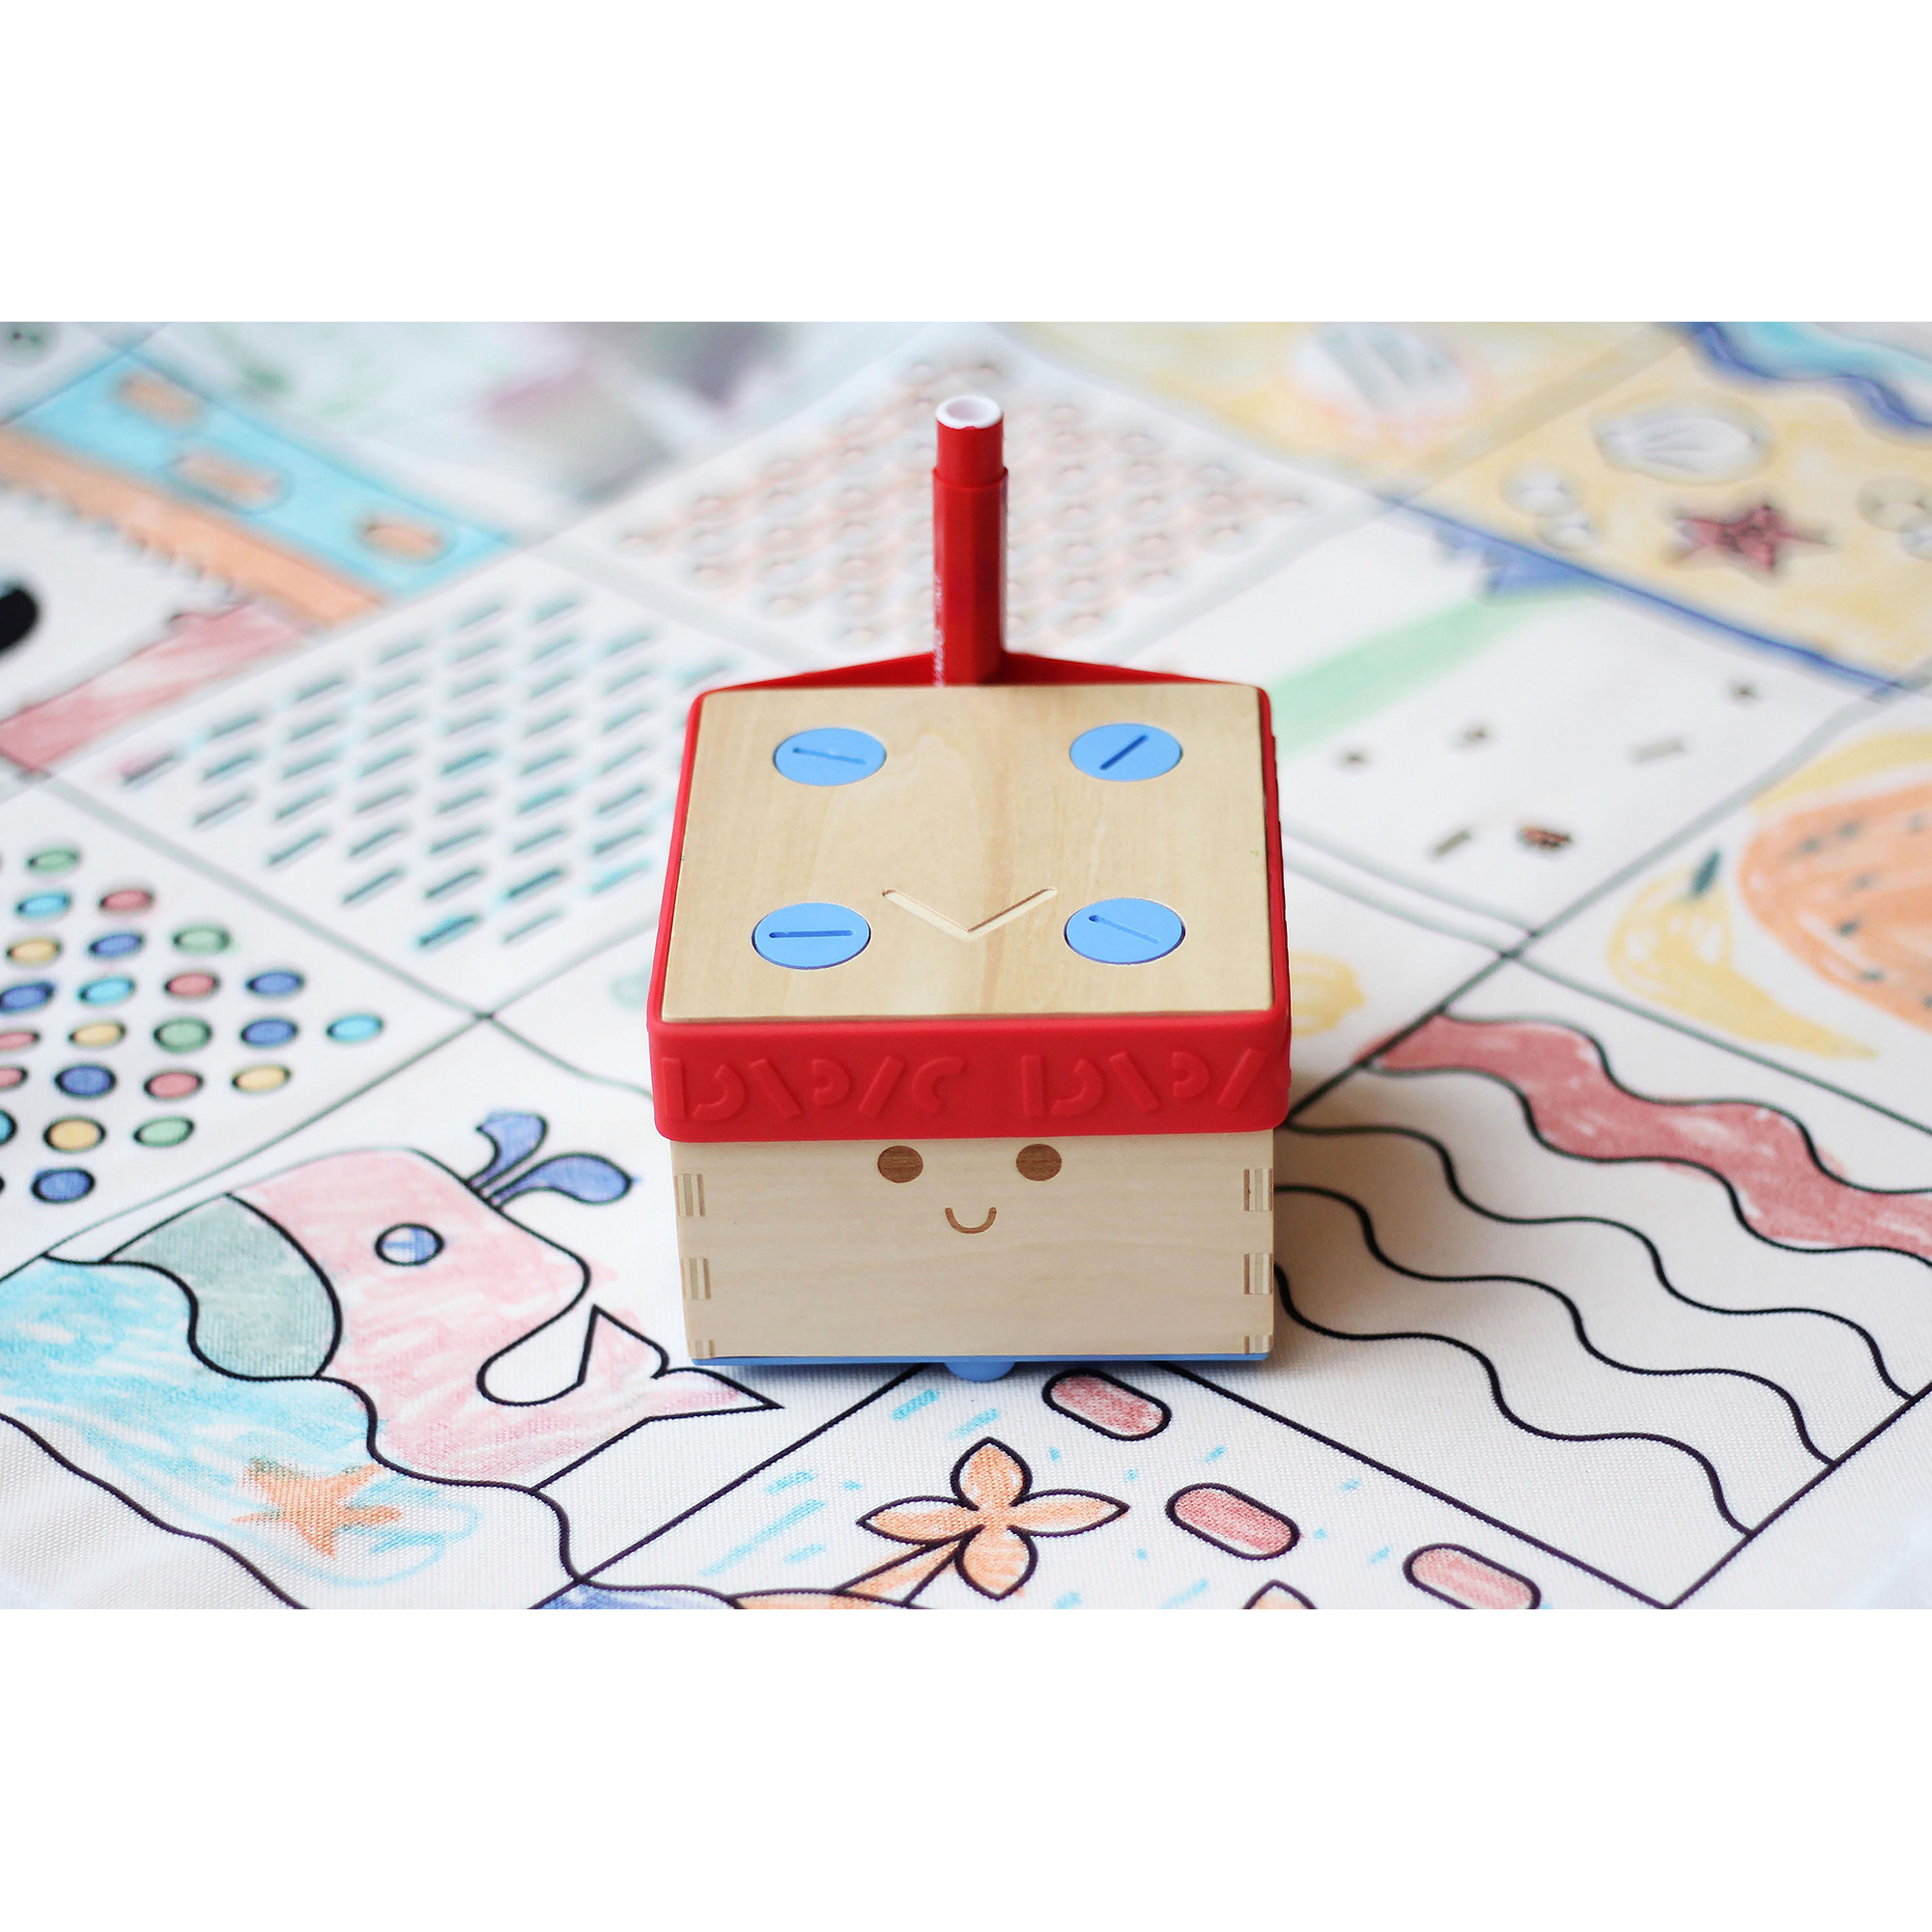 Cubetto Colouring Pack